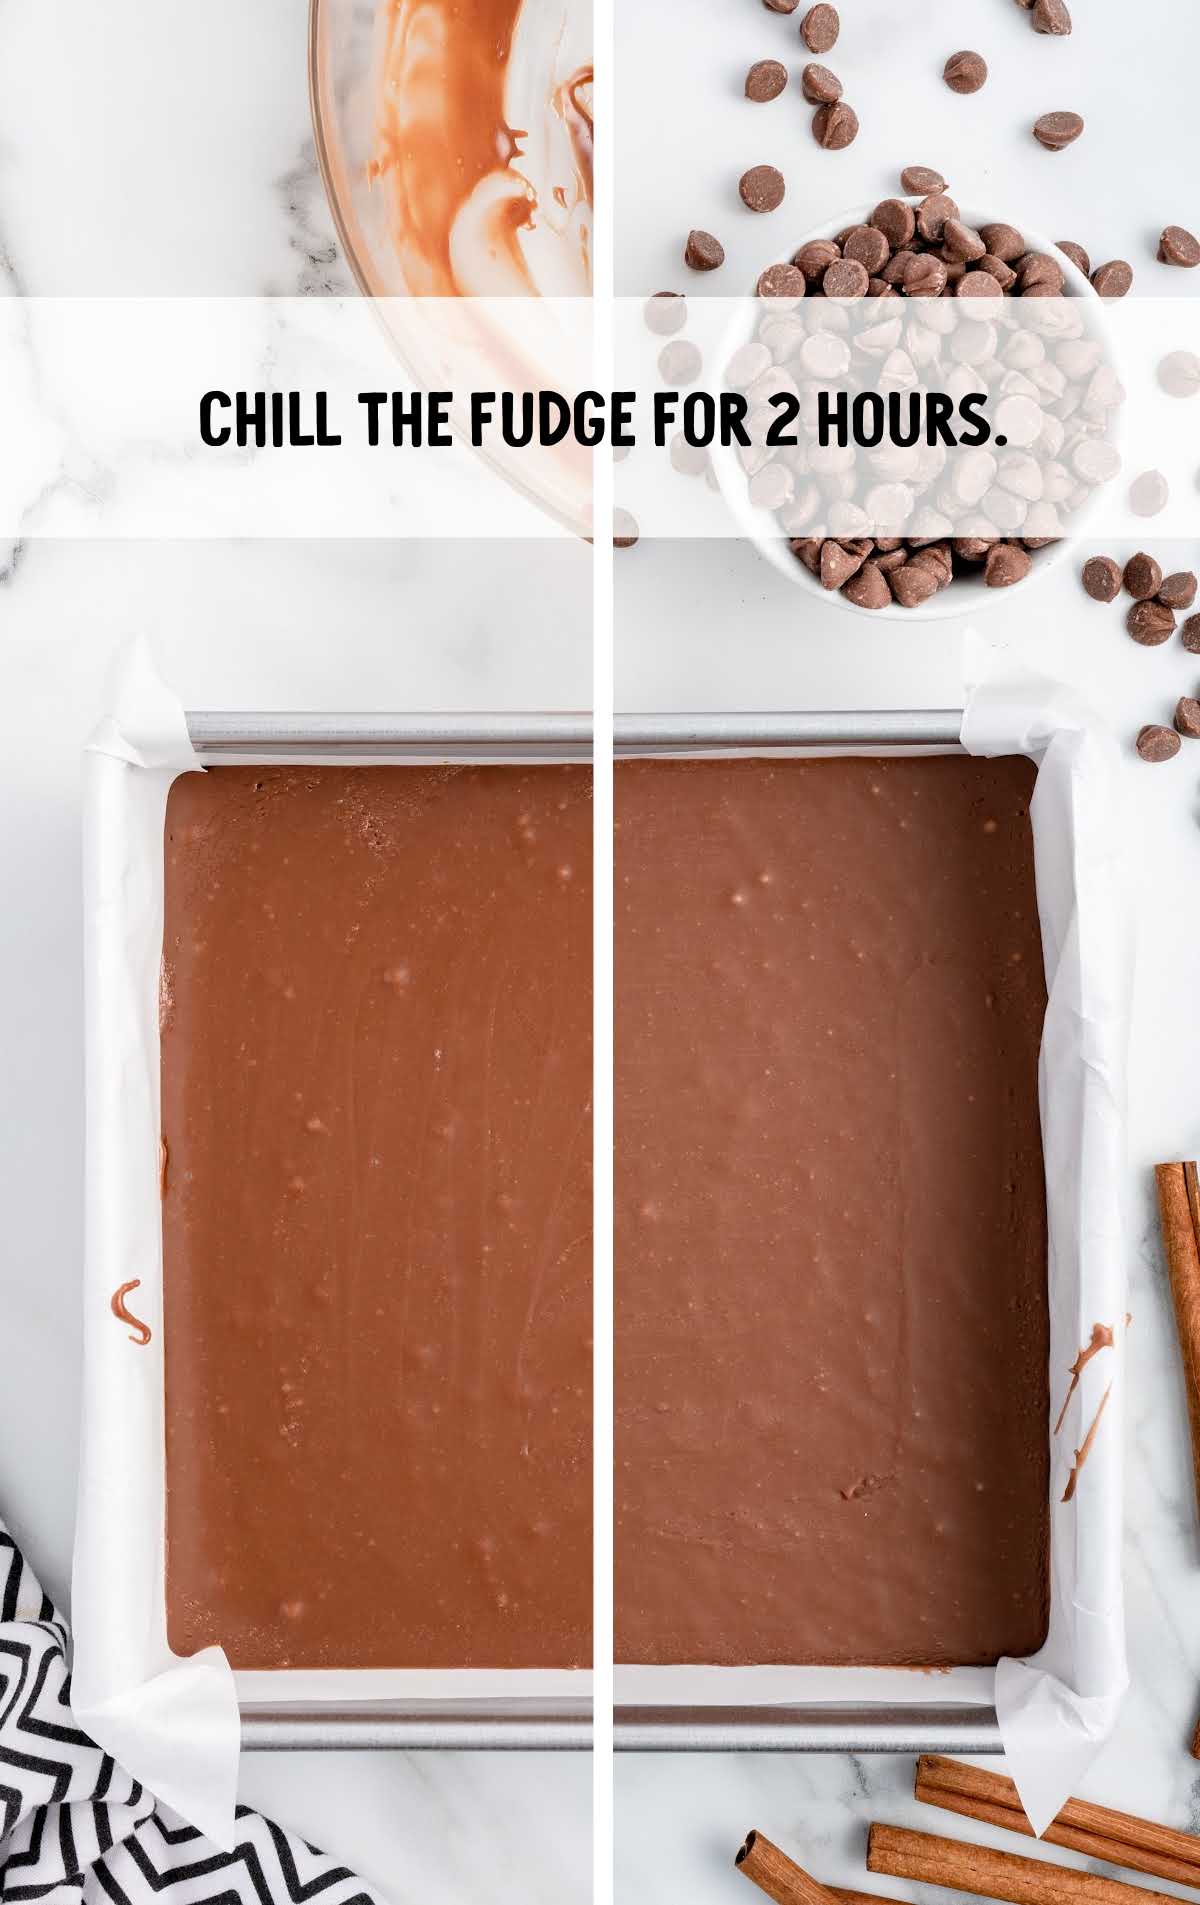 fudge chilled for 2 hours